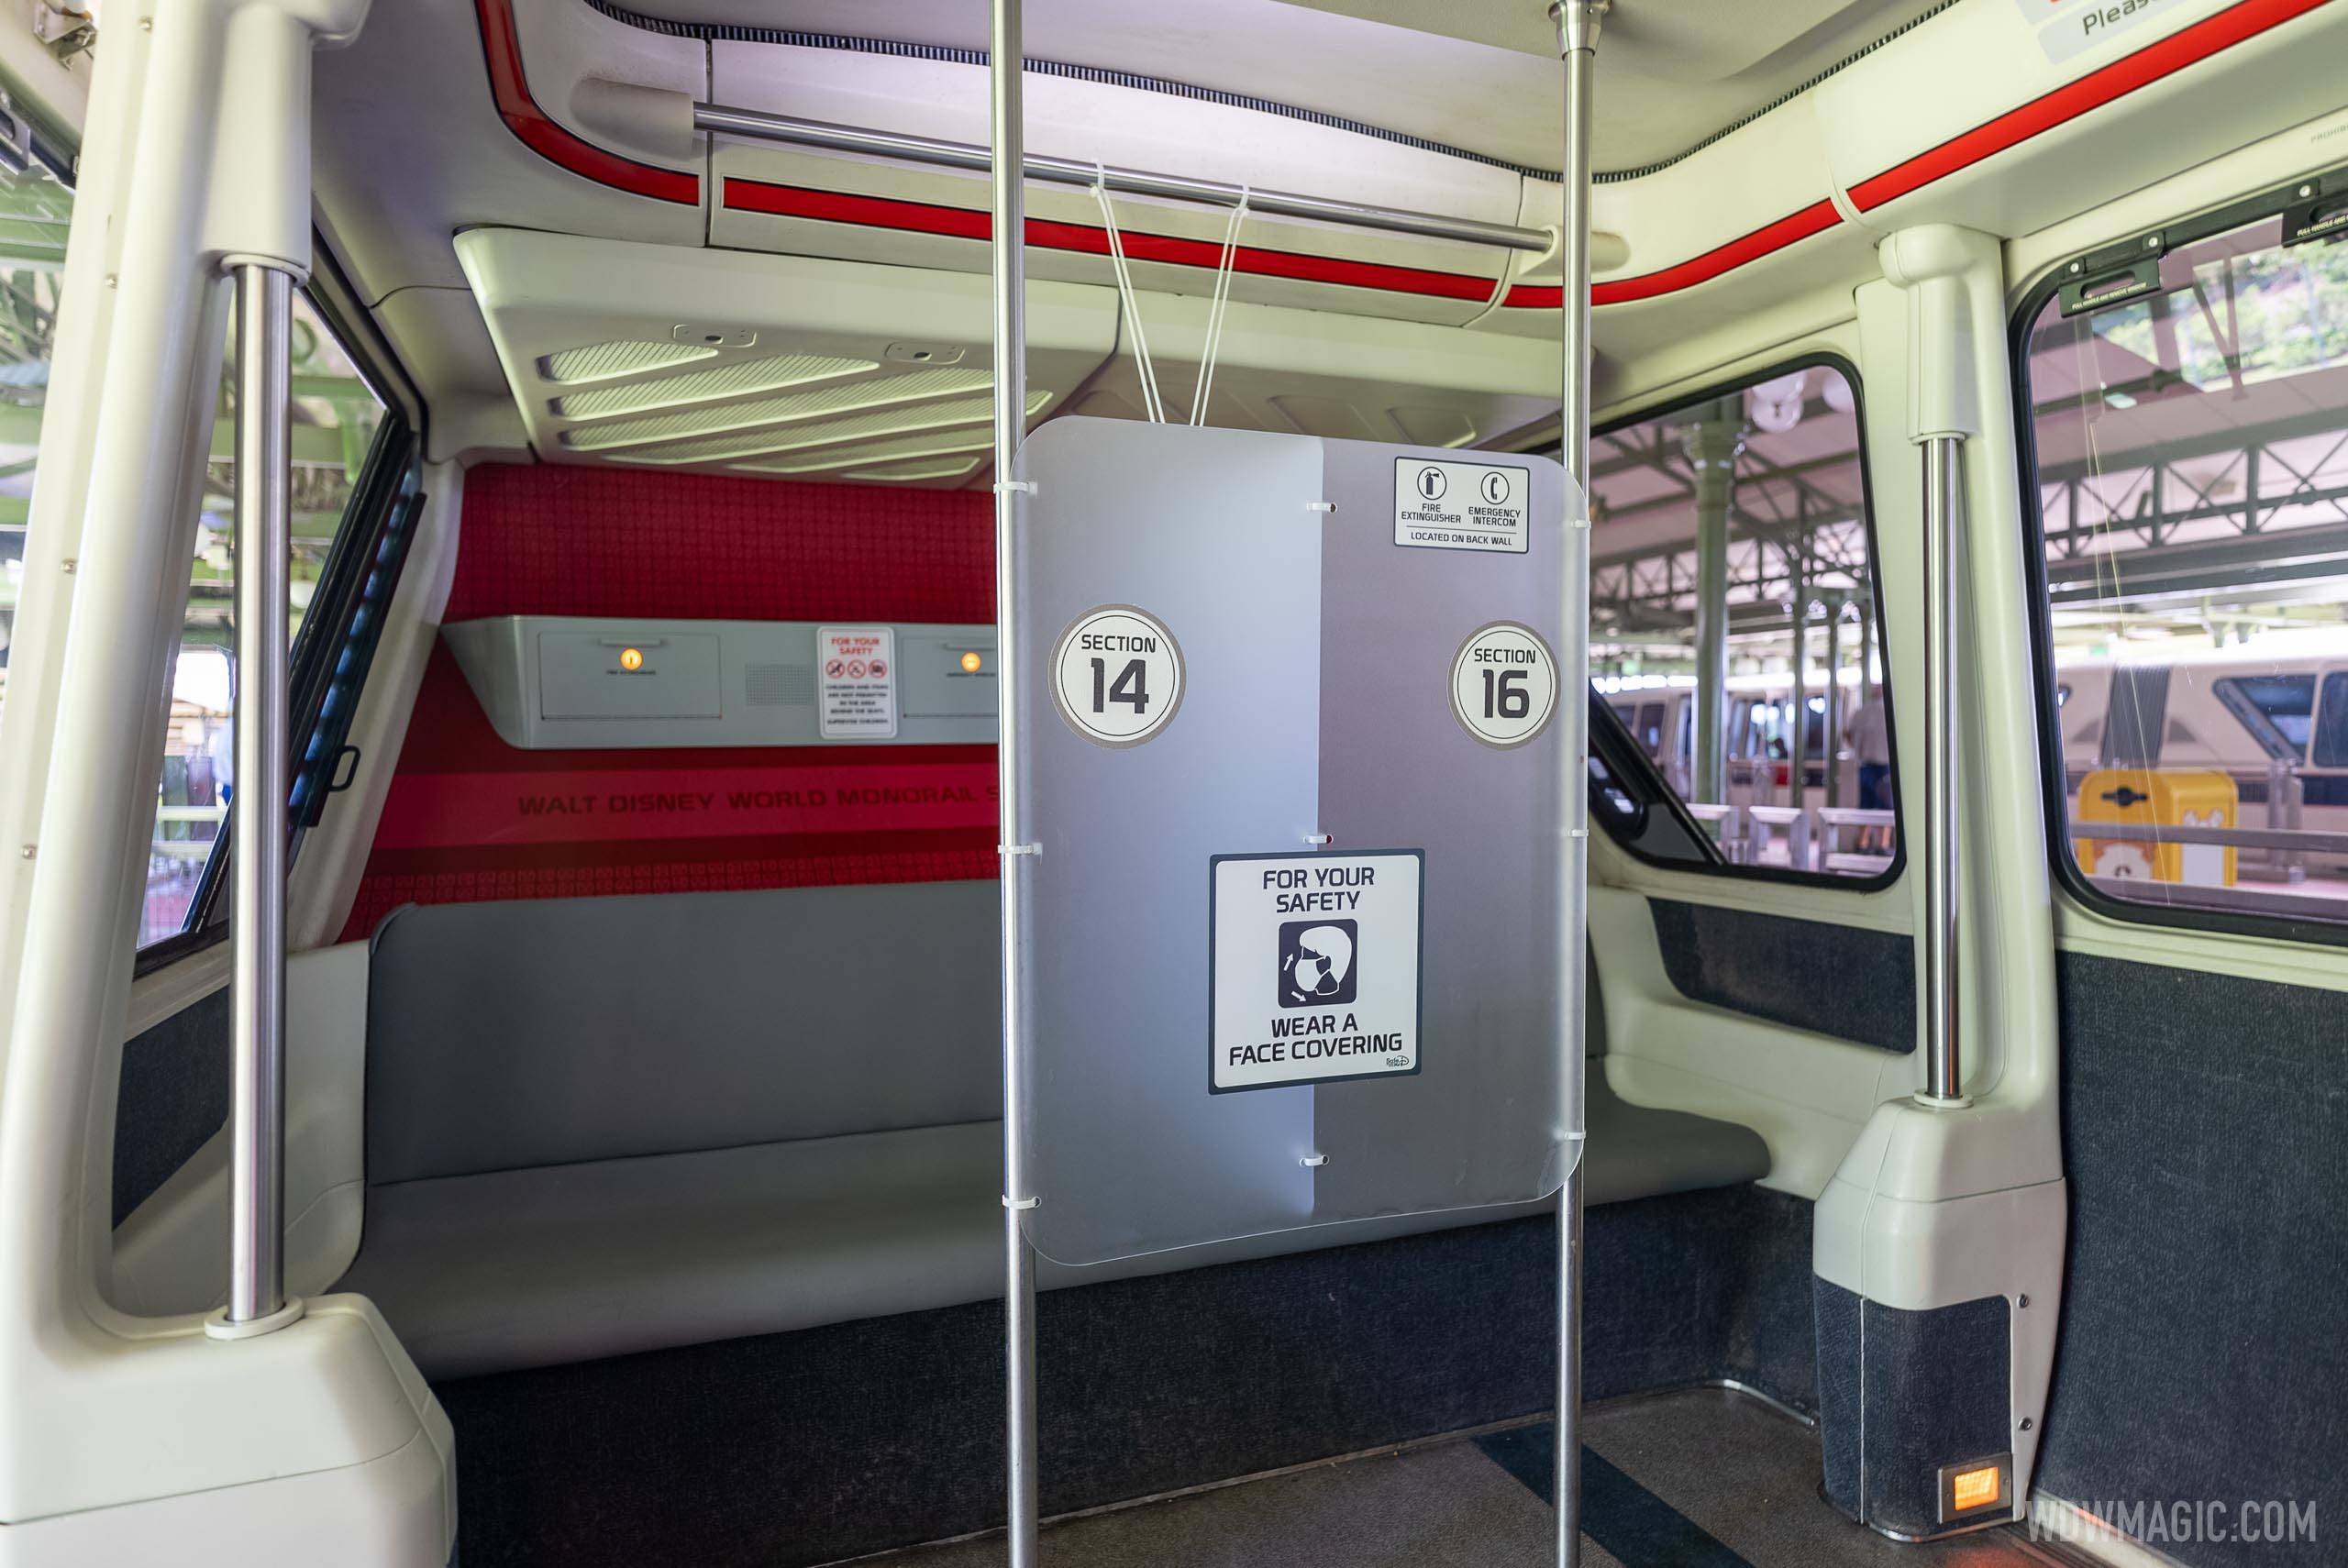 Walt Disney World Monorail System with physical distancing compartments - May 2021